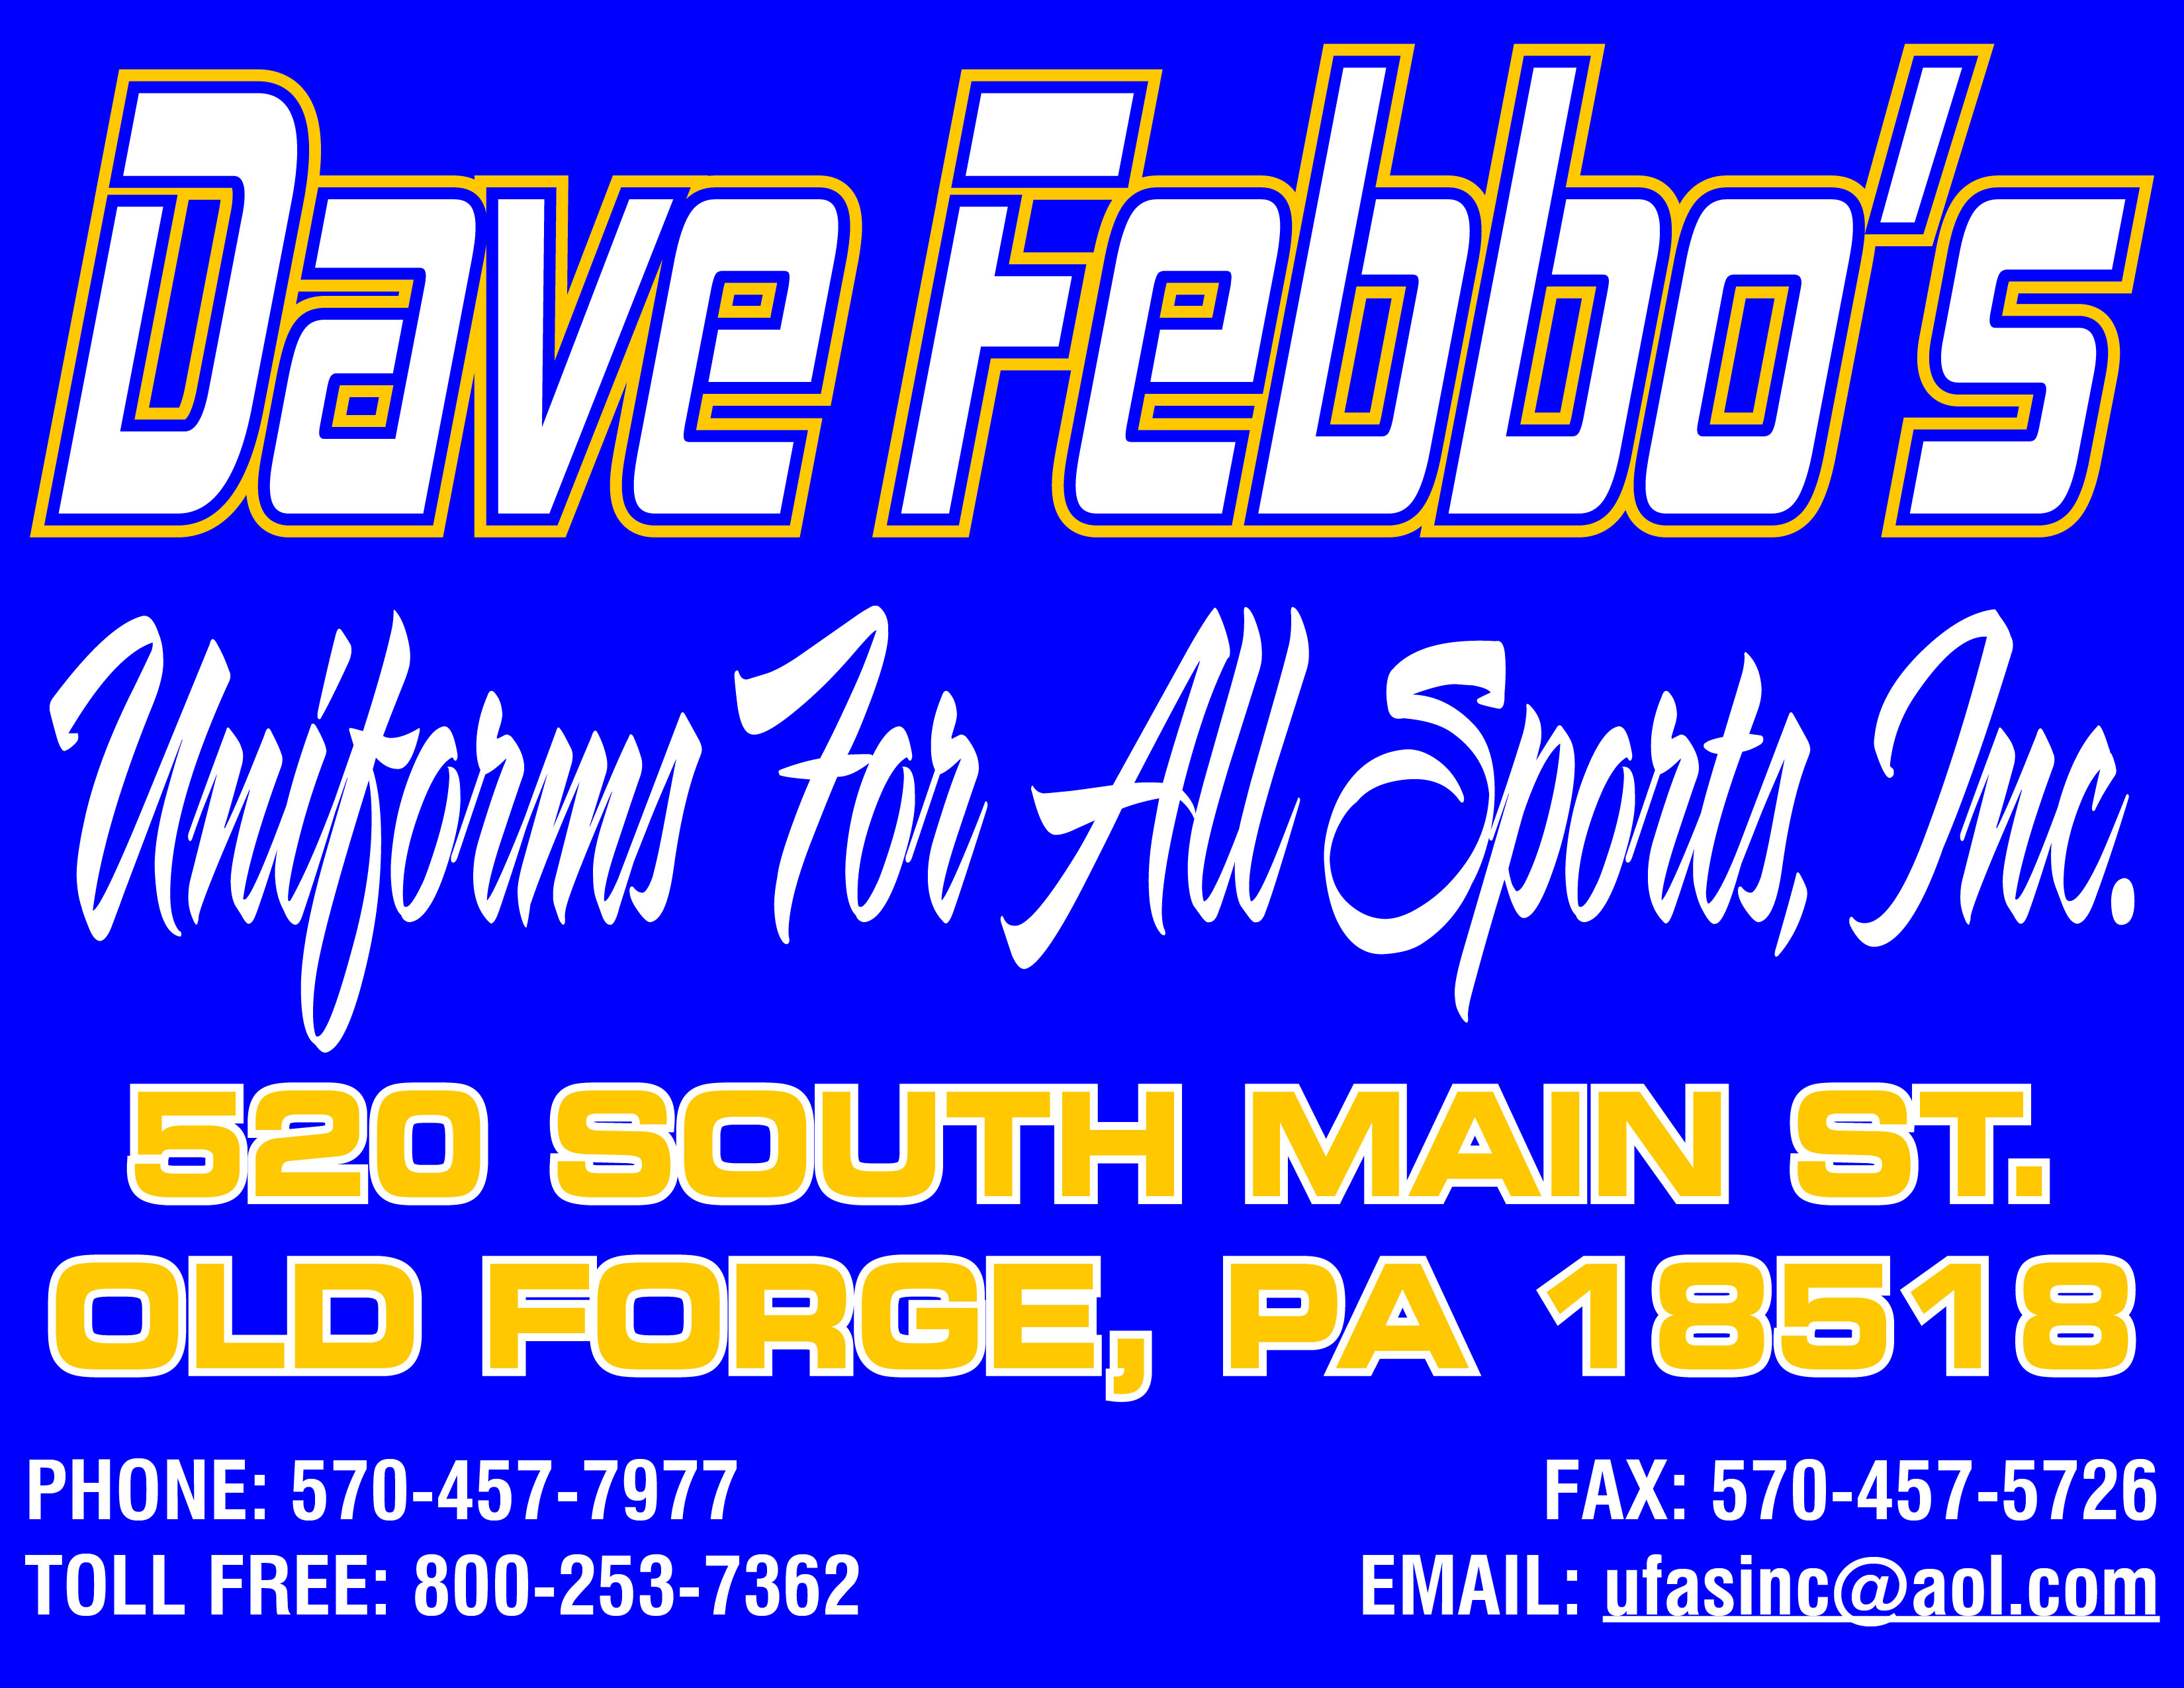 Dave Febbo's Sporting Goods - Call us at 570 457 7977